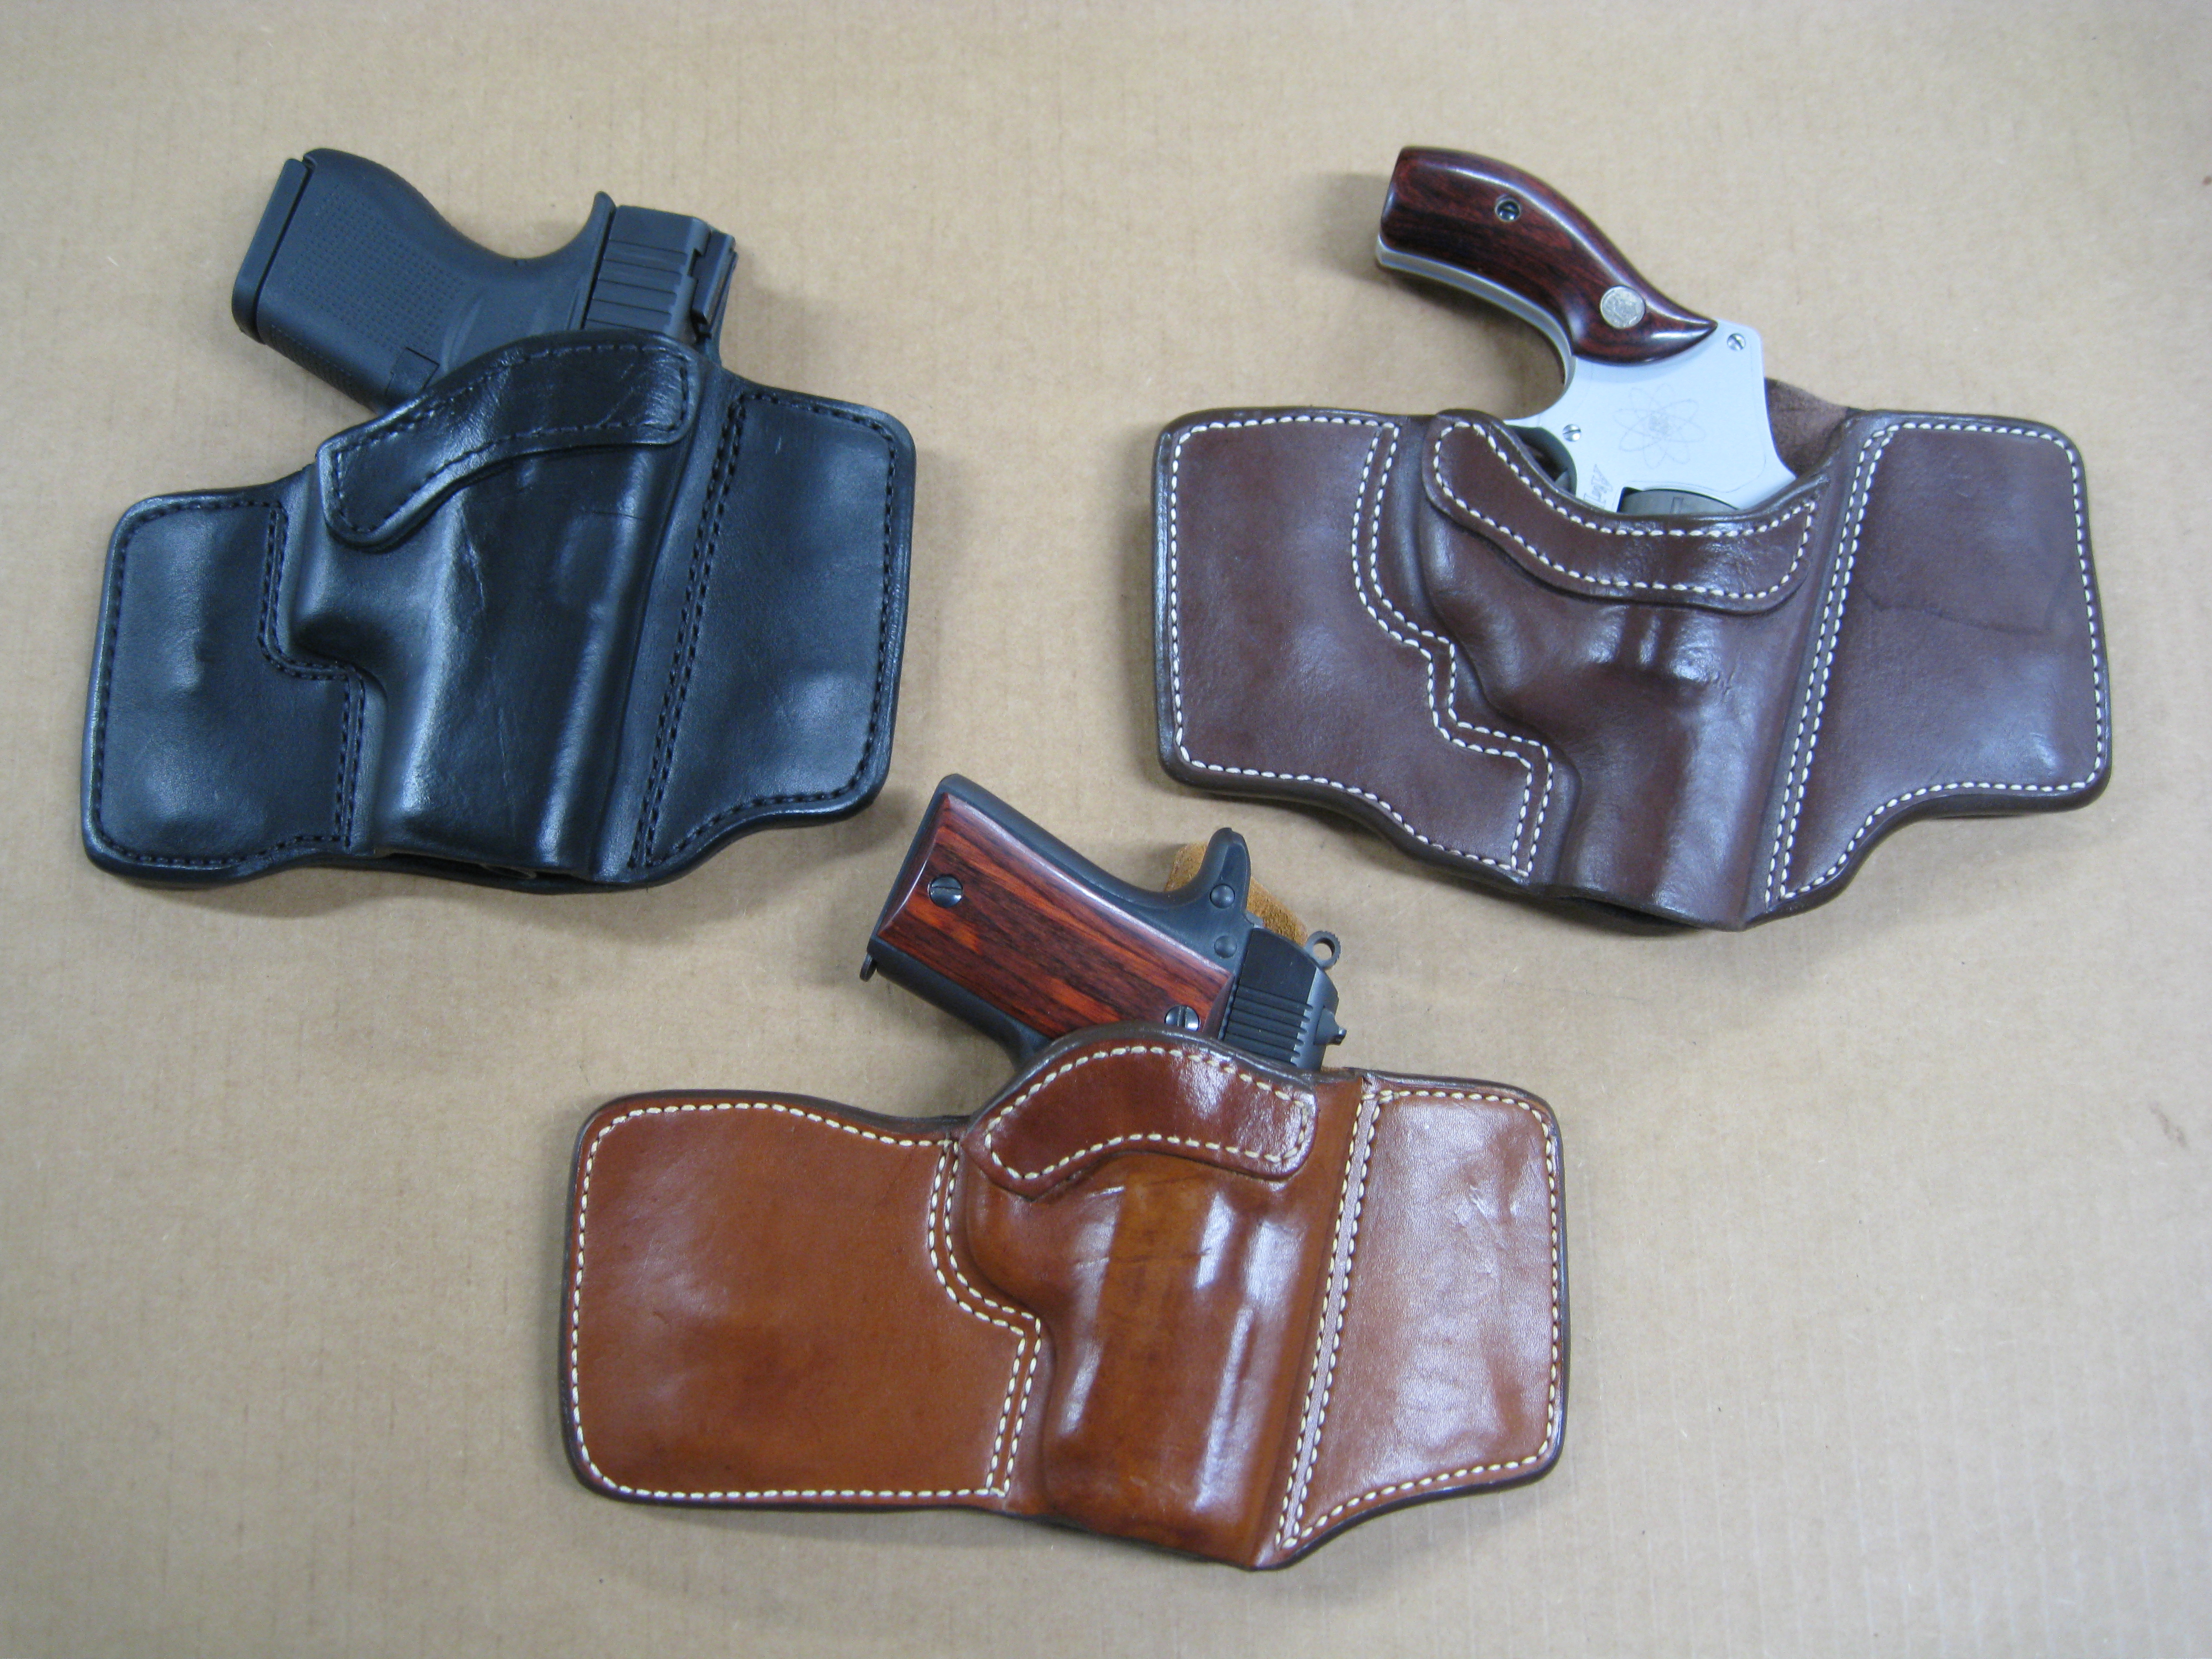 SPRINGFIELD ARMORY MICRO COMPACT 3" leather pancake owb belt slide holster 